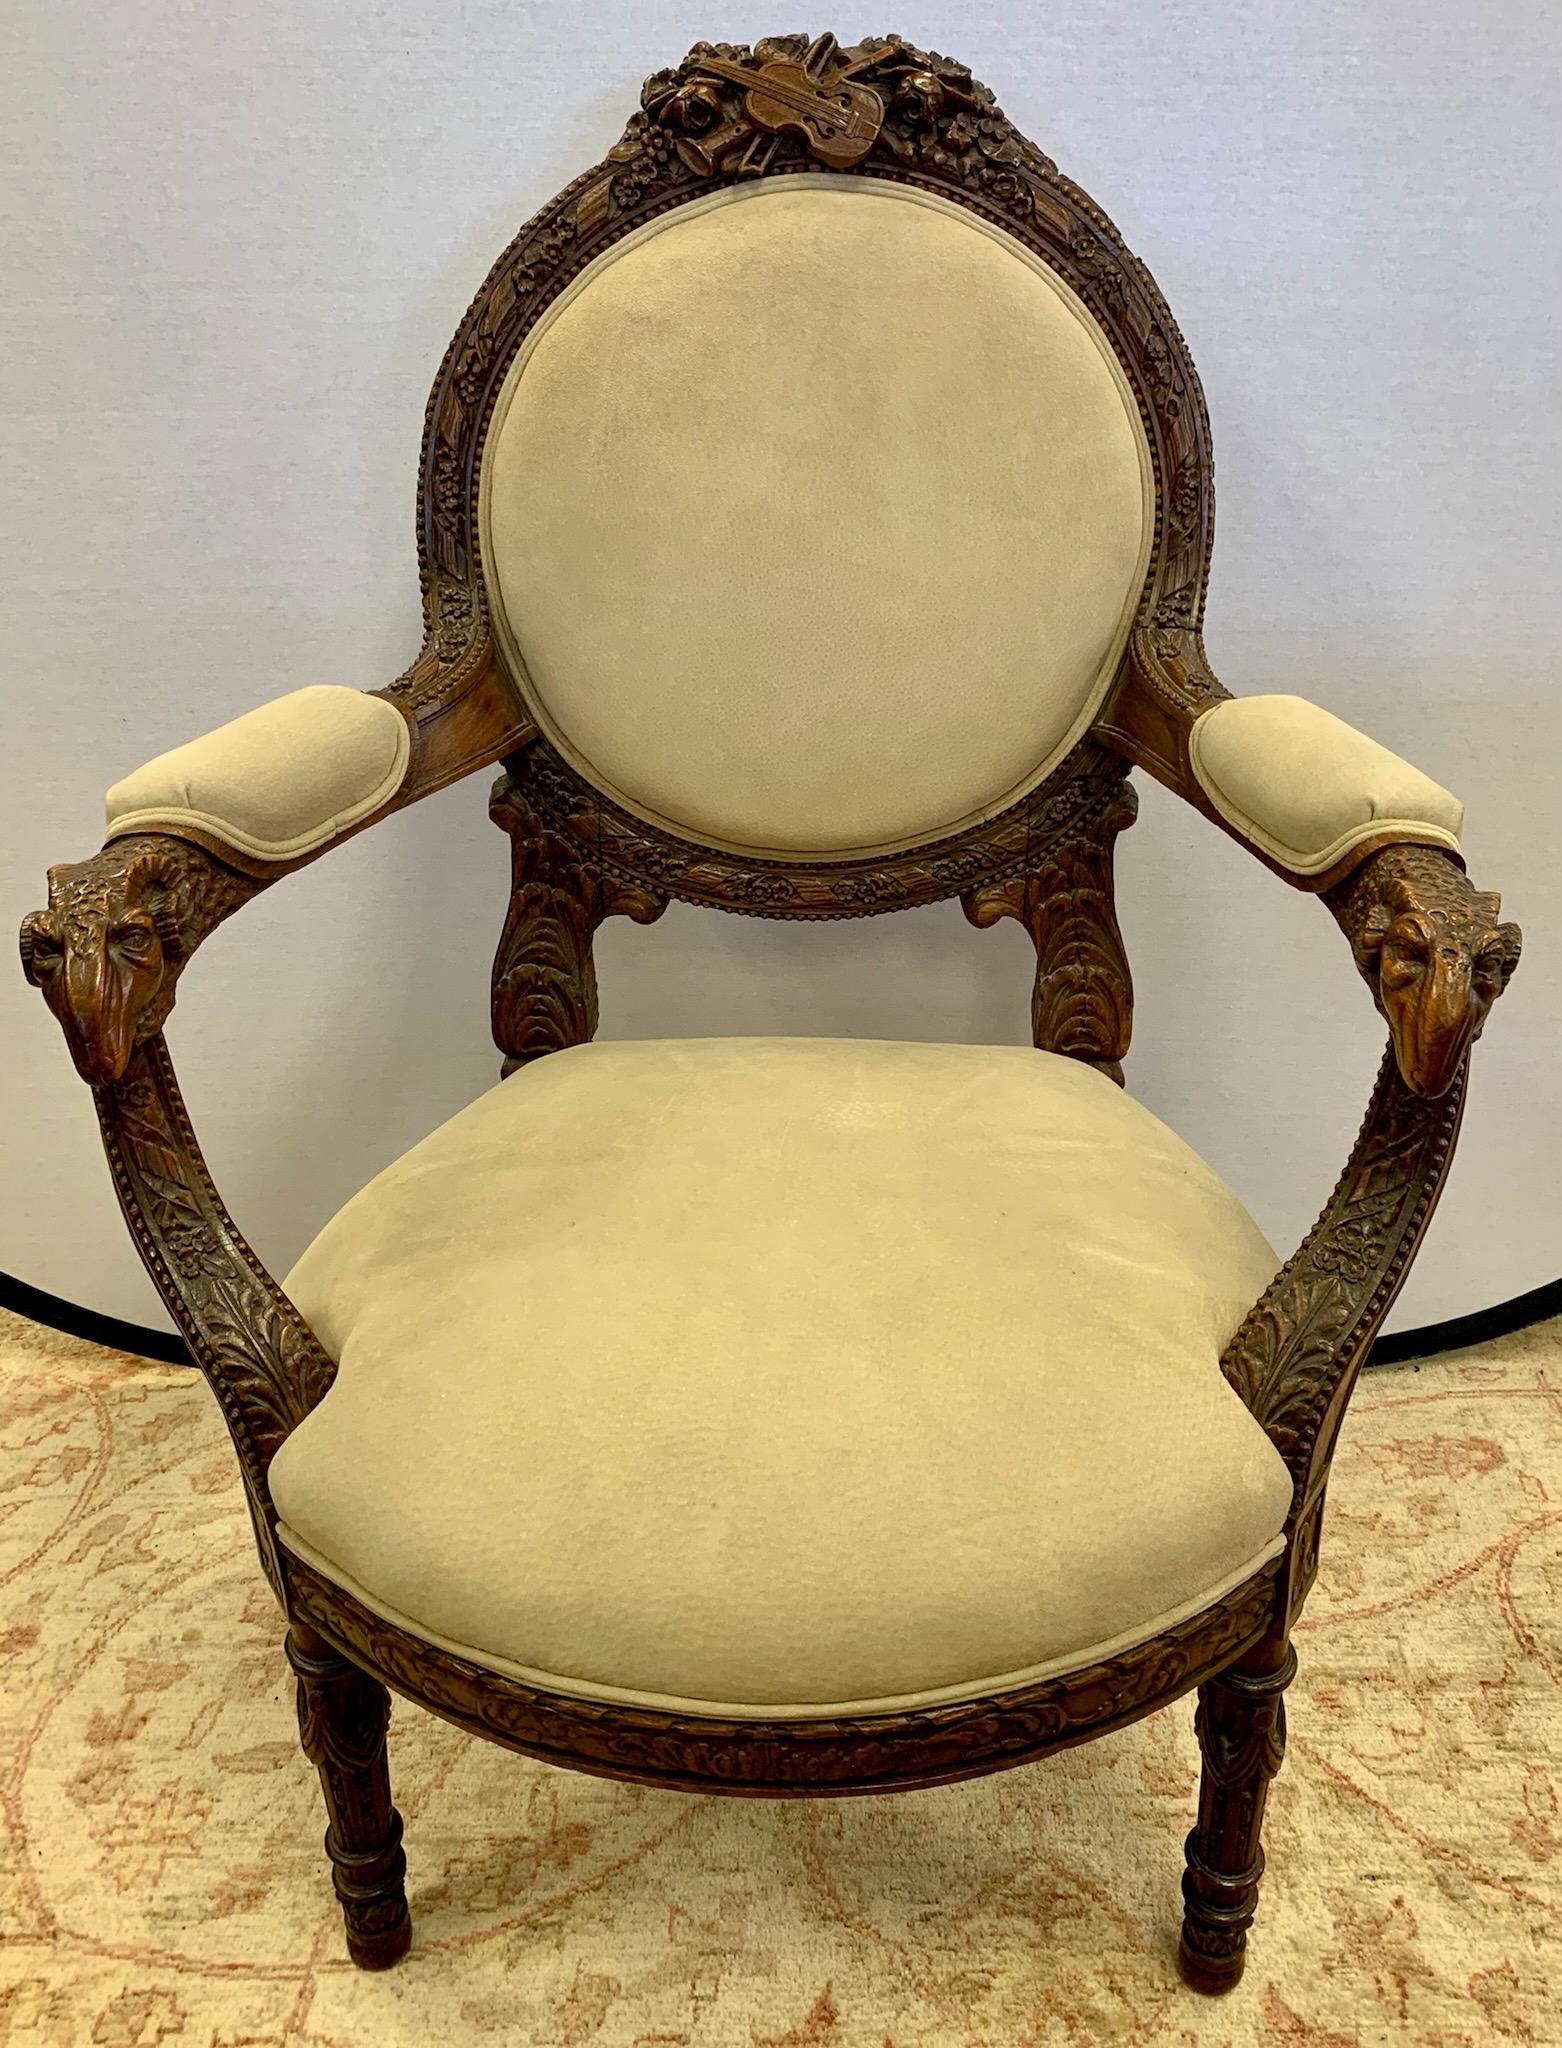 Magnificent French walnut armchairs featuring elaborate carved details including the carved crest and ram's head arms. See pictures for details. Upholstered in a neutral suede fabric.